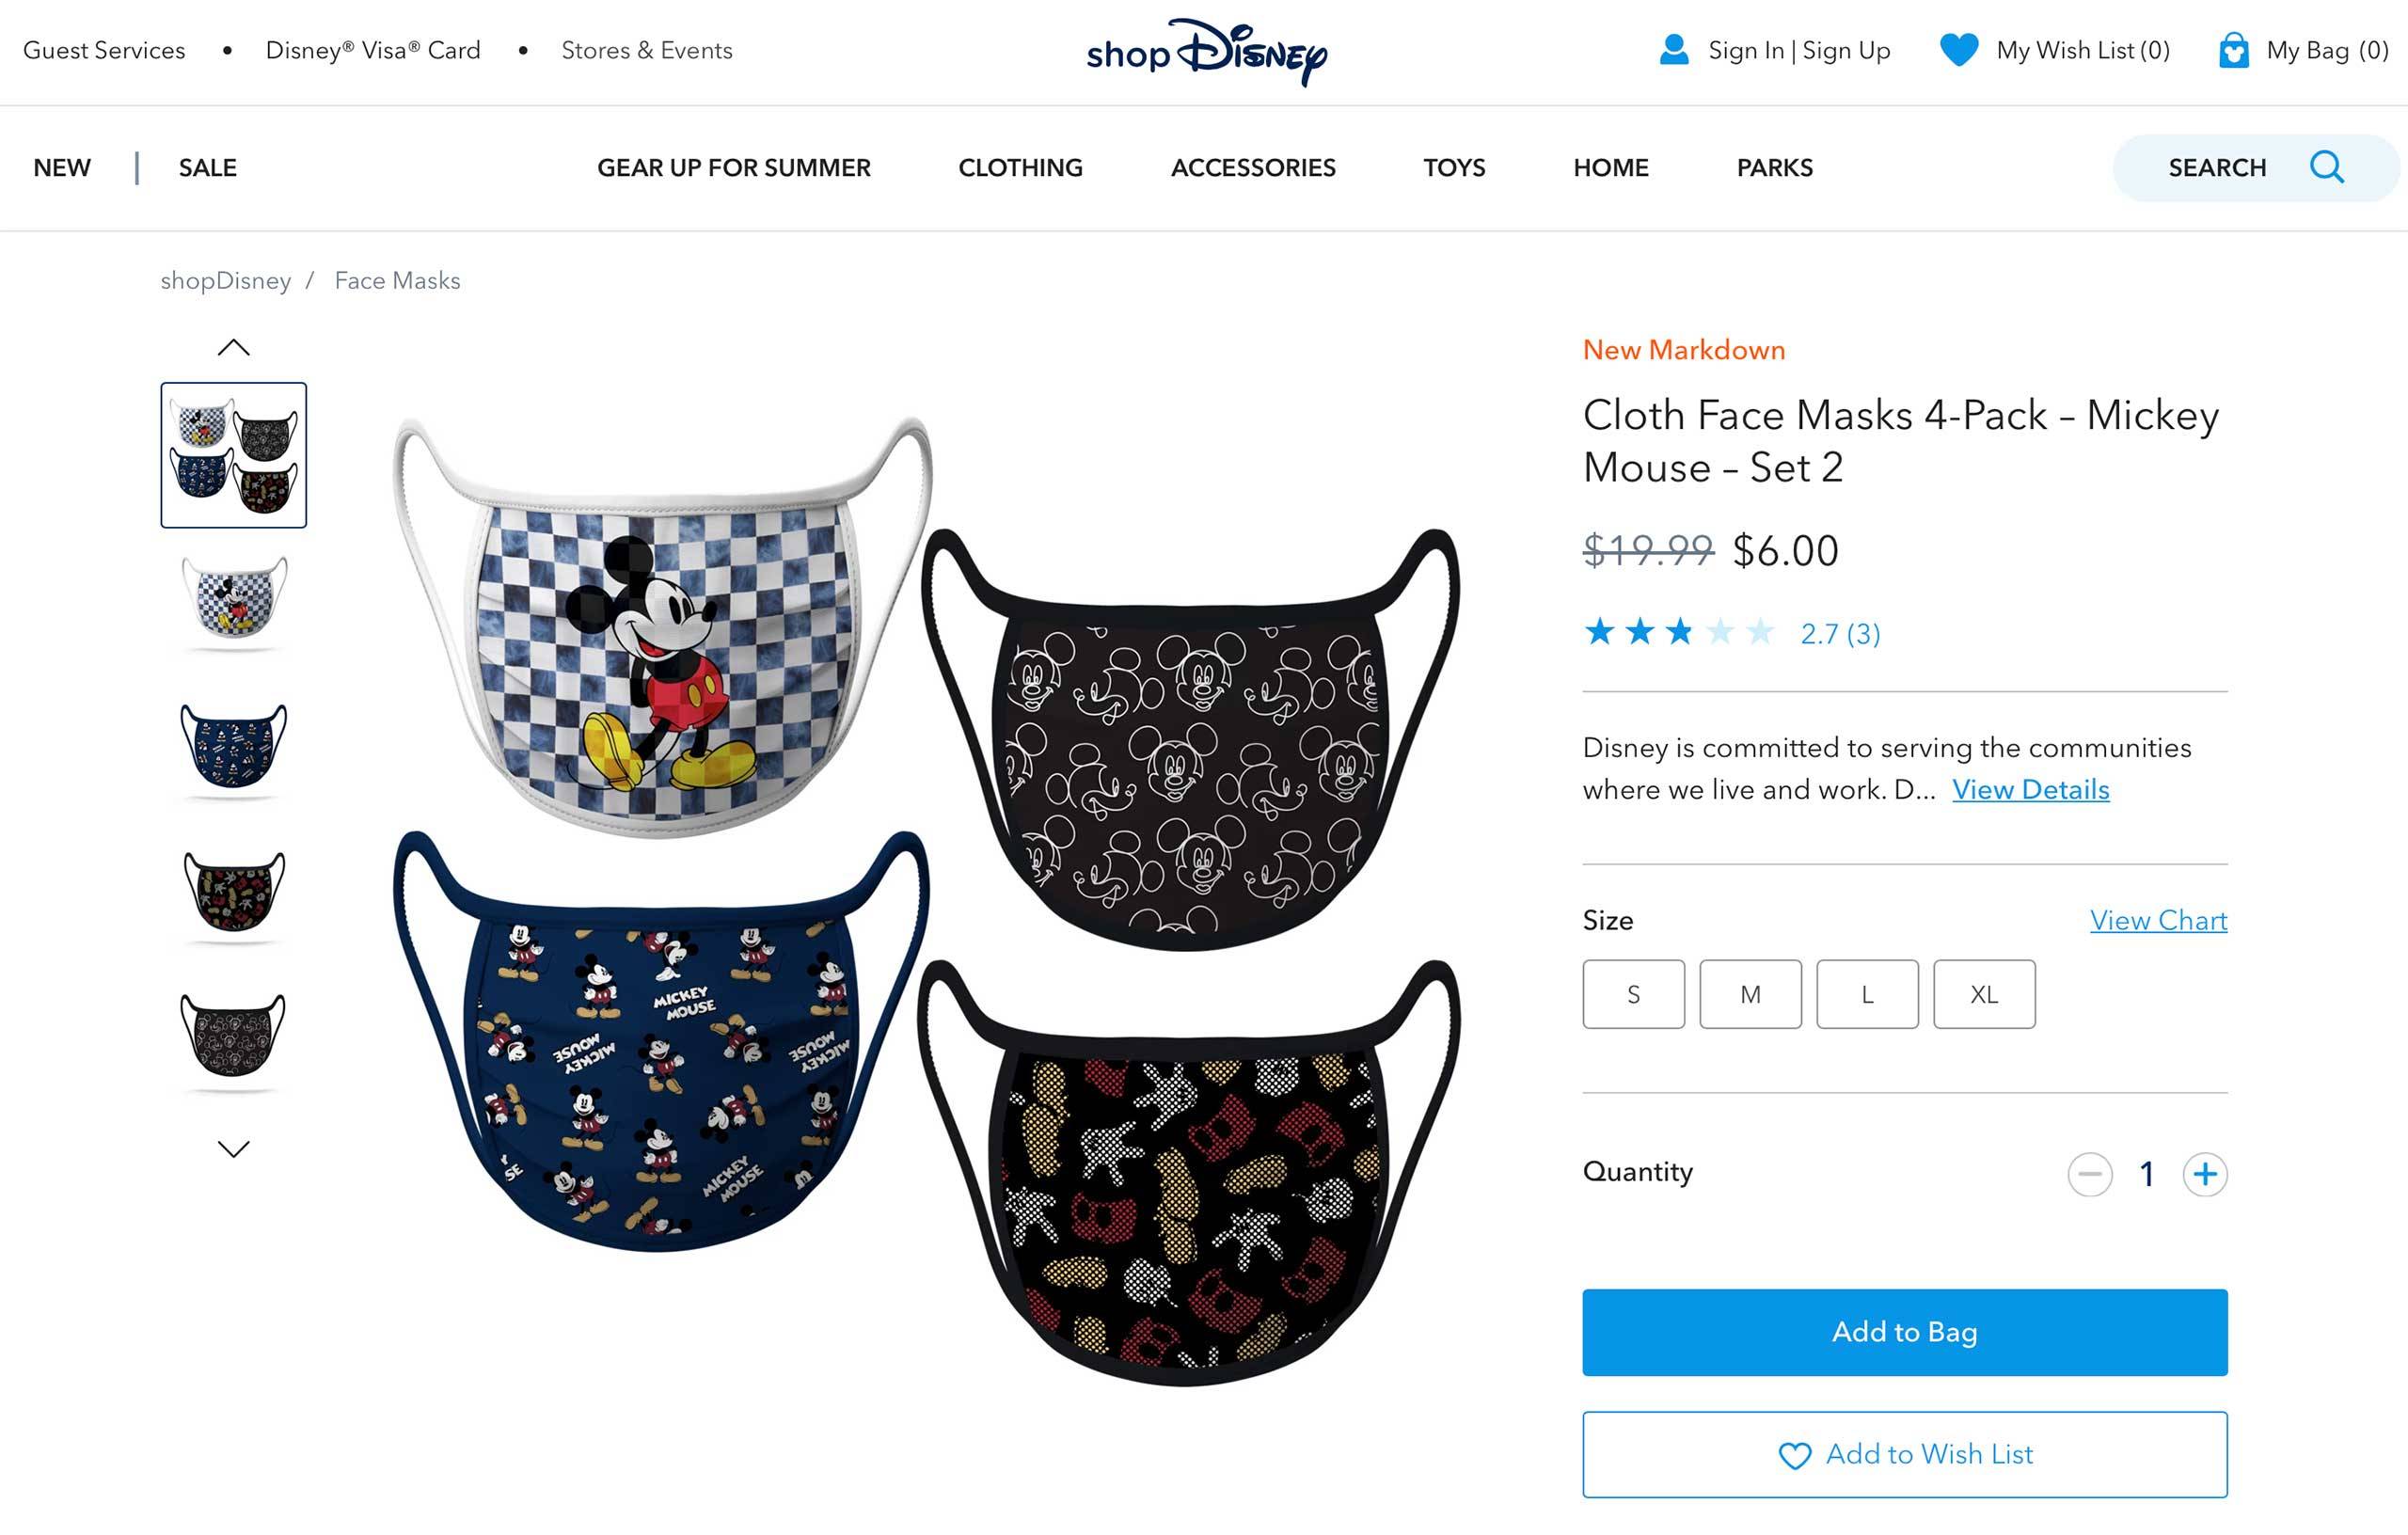 Disney continues selling character-themed masks at heavily discounted prices despite new mask requirements